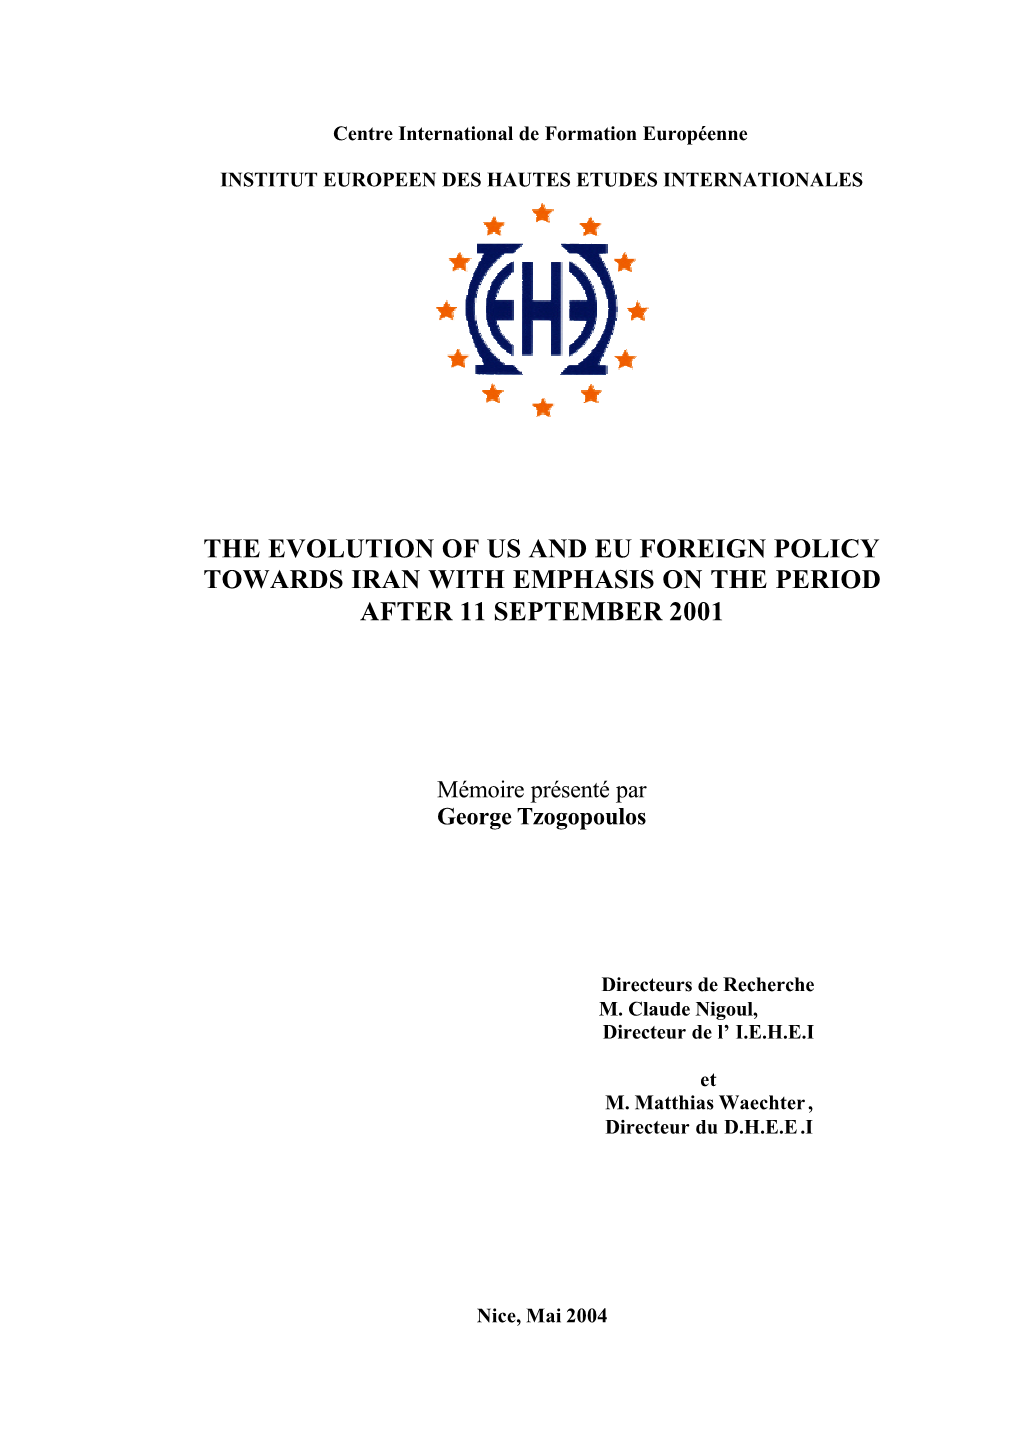 The Evolution of Us and Eu Foreign Policy Towards Iran with Emphasis on the Period After 11 September 2001